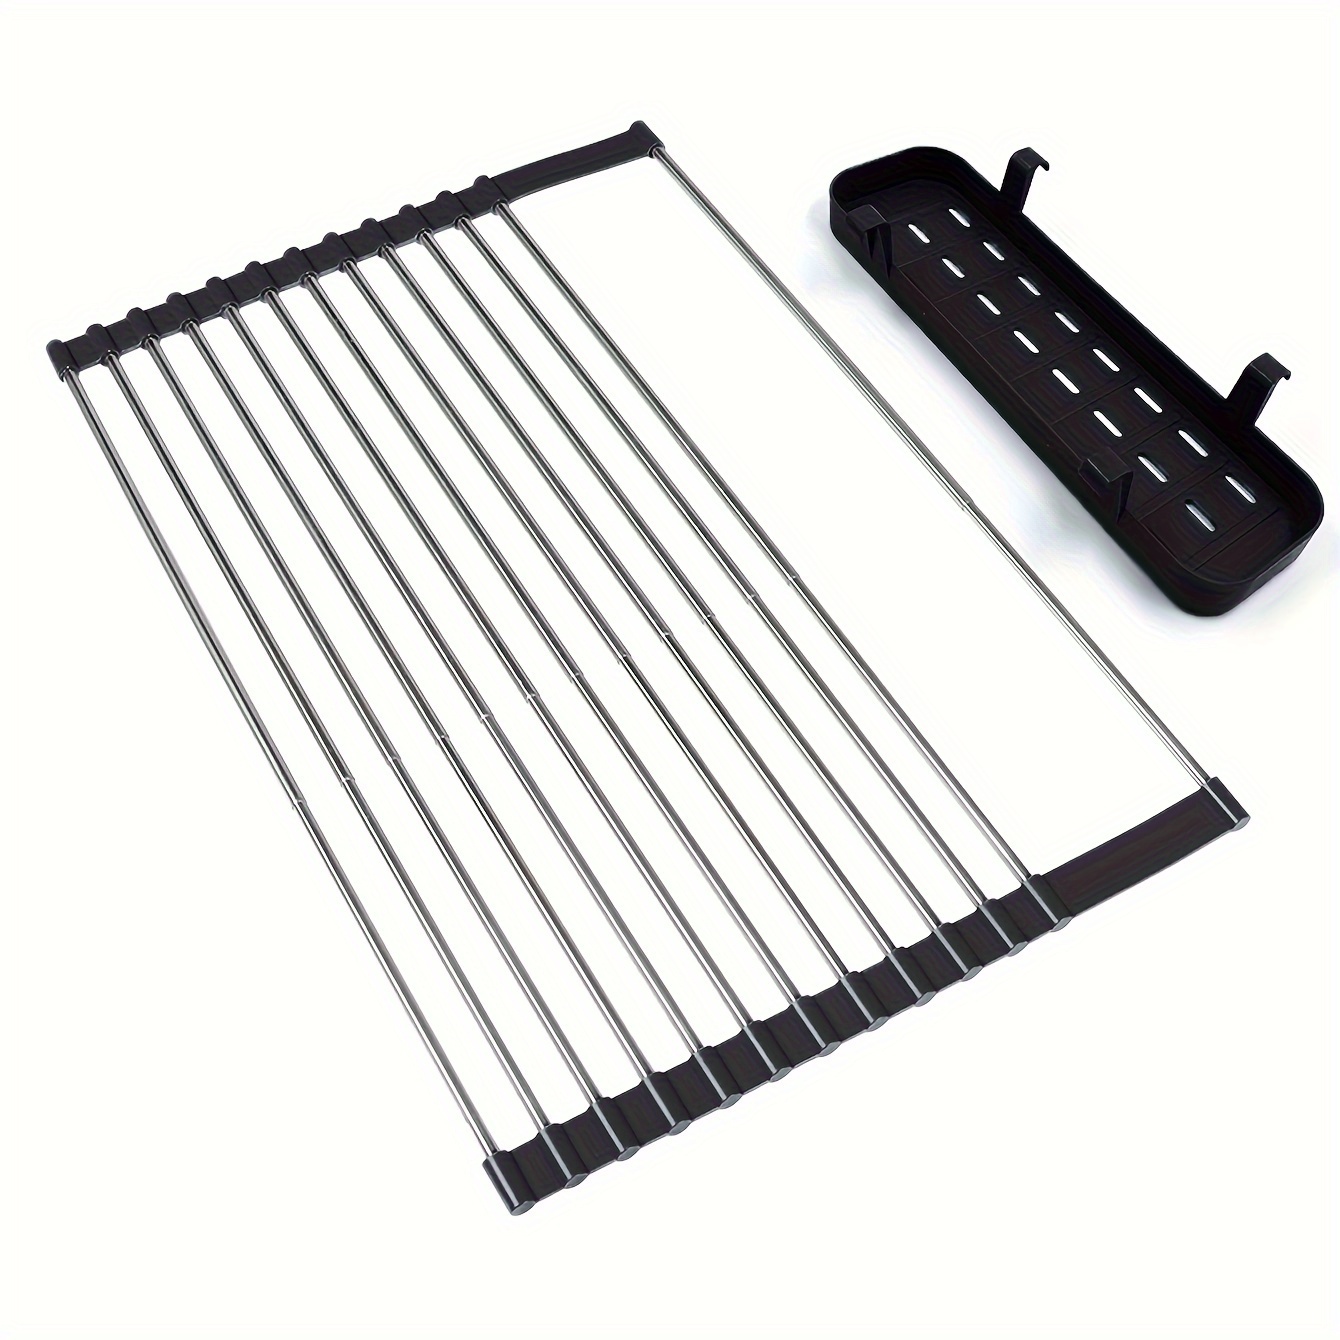 Expandable Roll Up Dish Drying Rack with Storage Baskets,Over